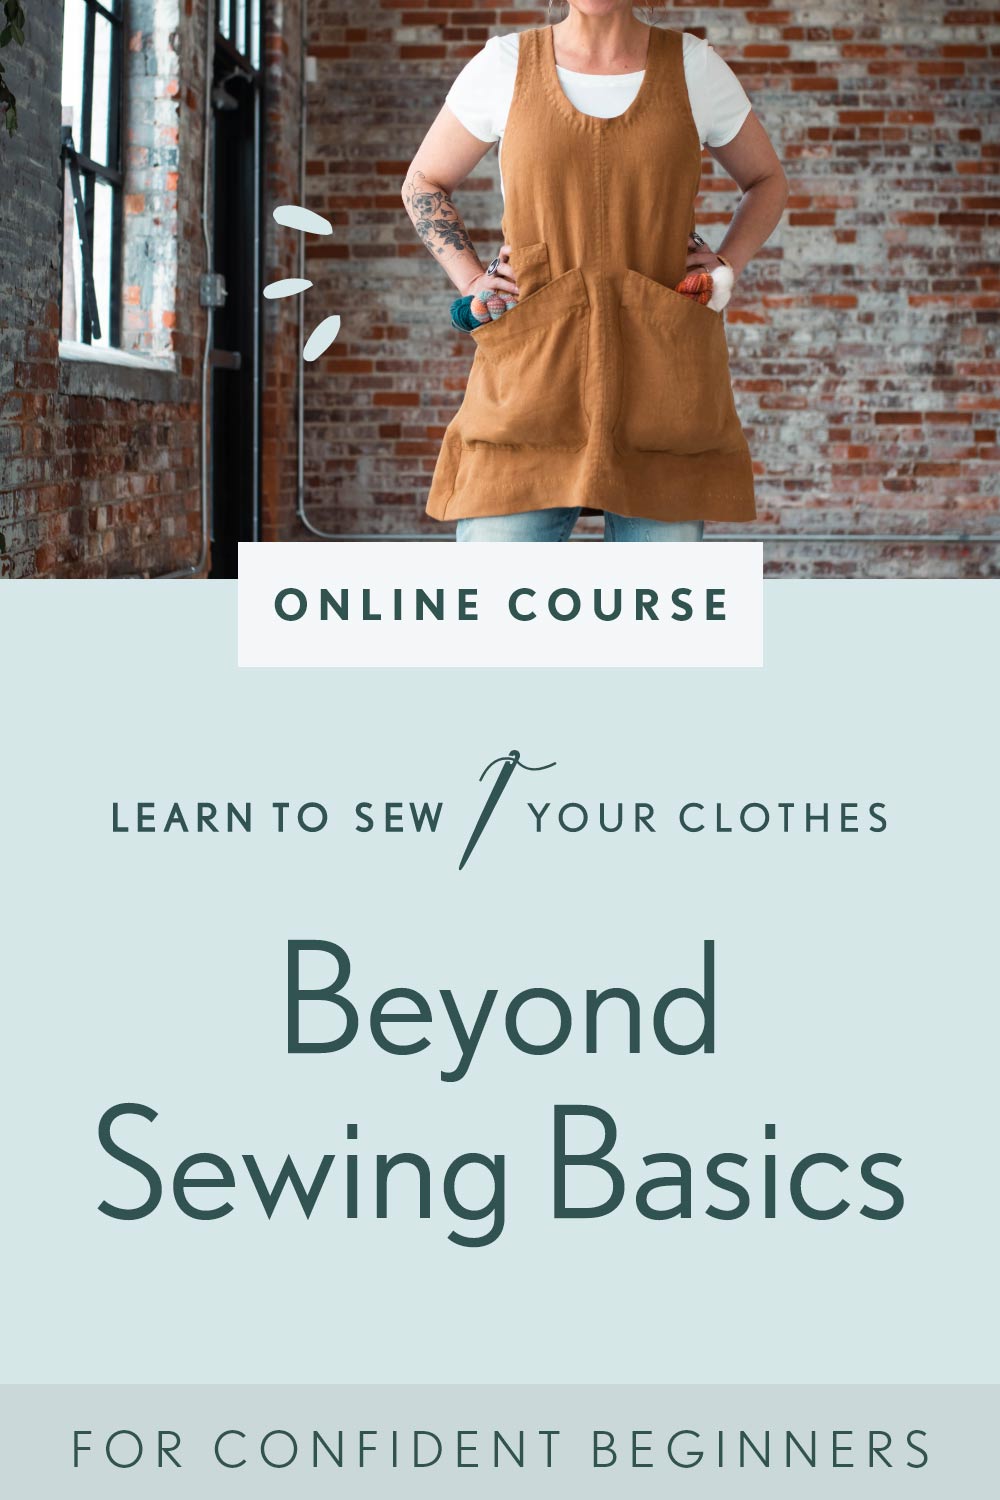 Beyond Sewing Basics course, featuring Meg wearing the Studio Tunic